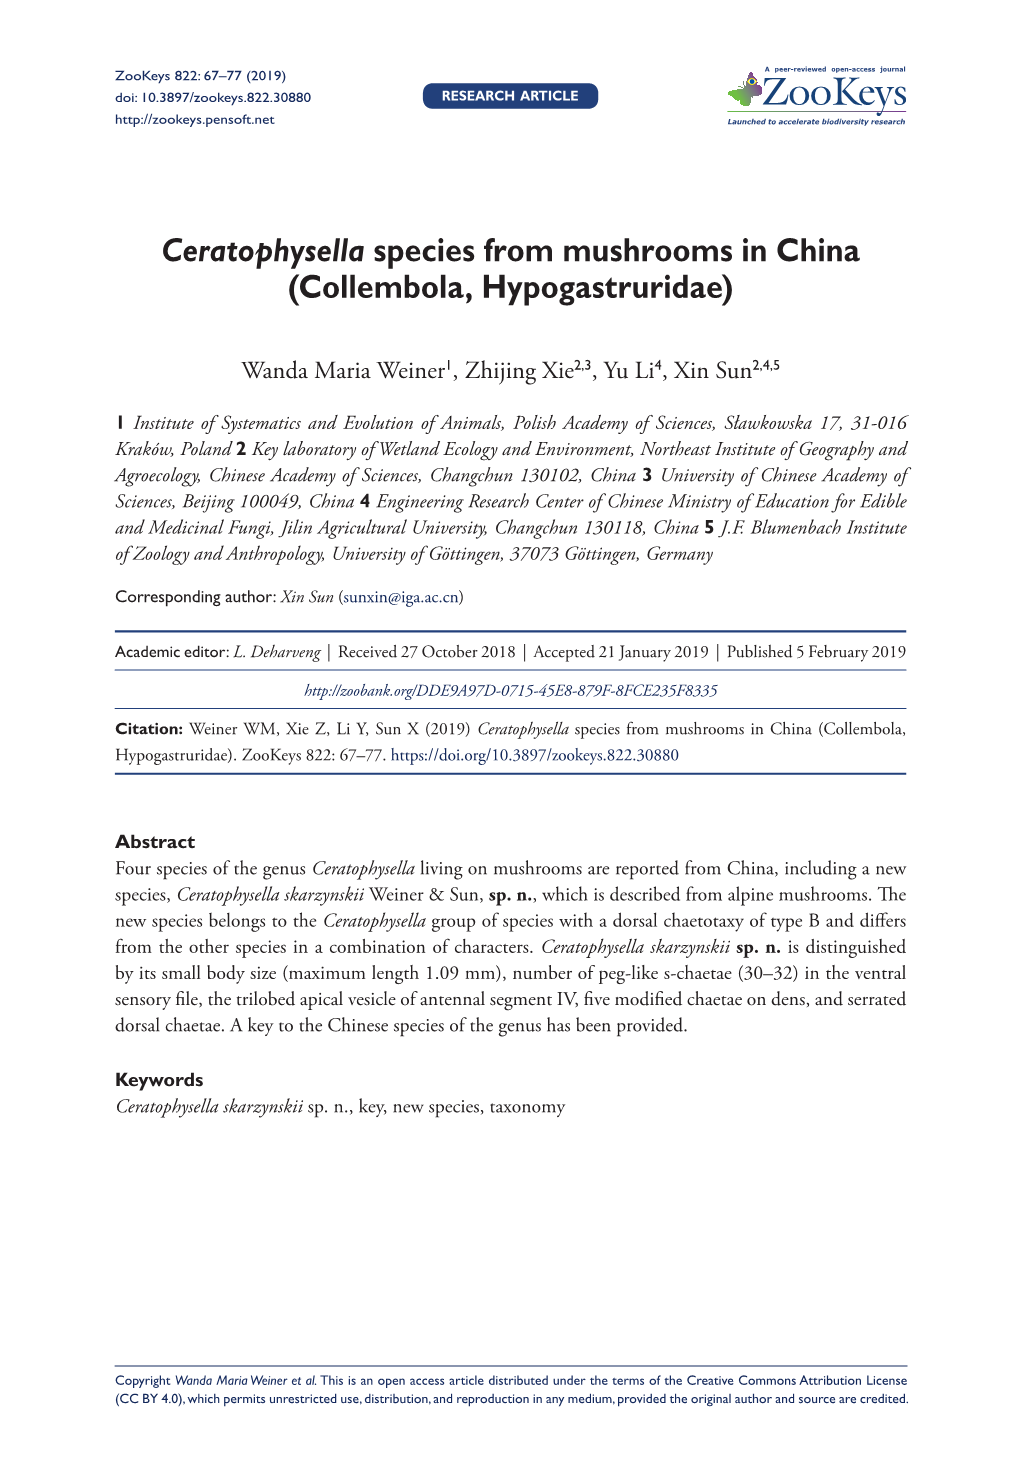 Ceratophysella Species from Mushrooms in China (Collembola, Hypogastruridae)